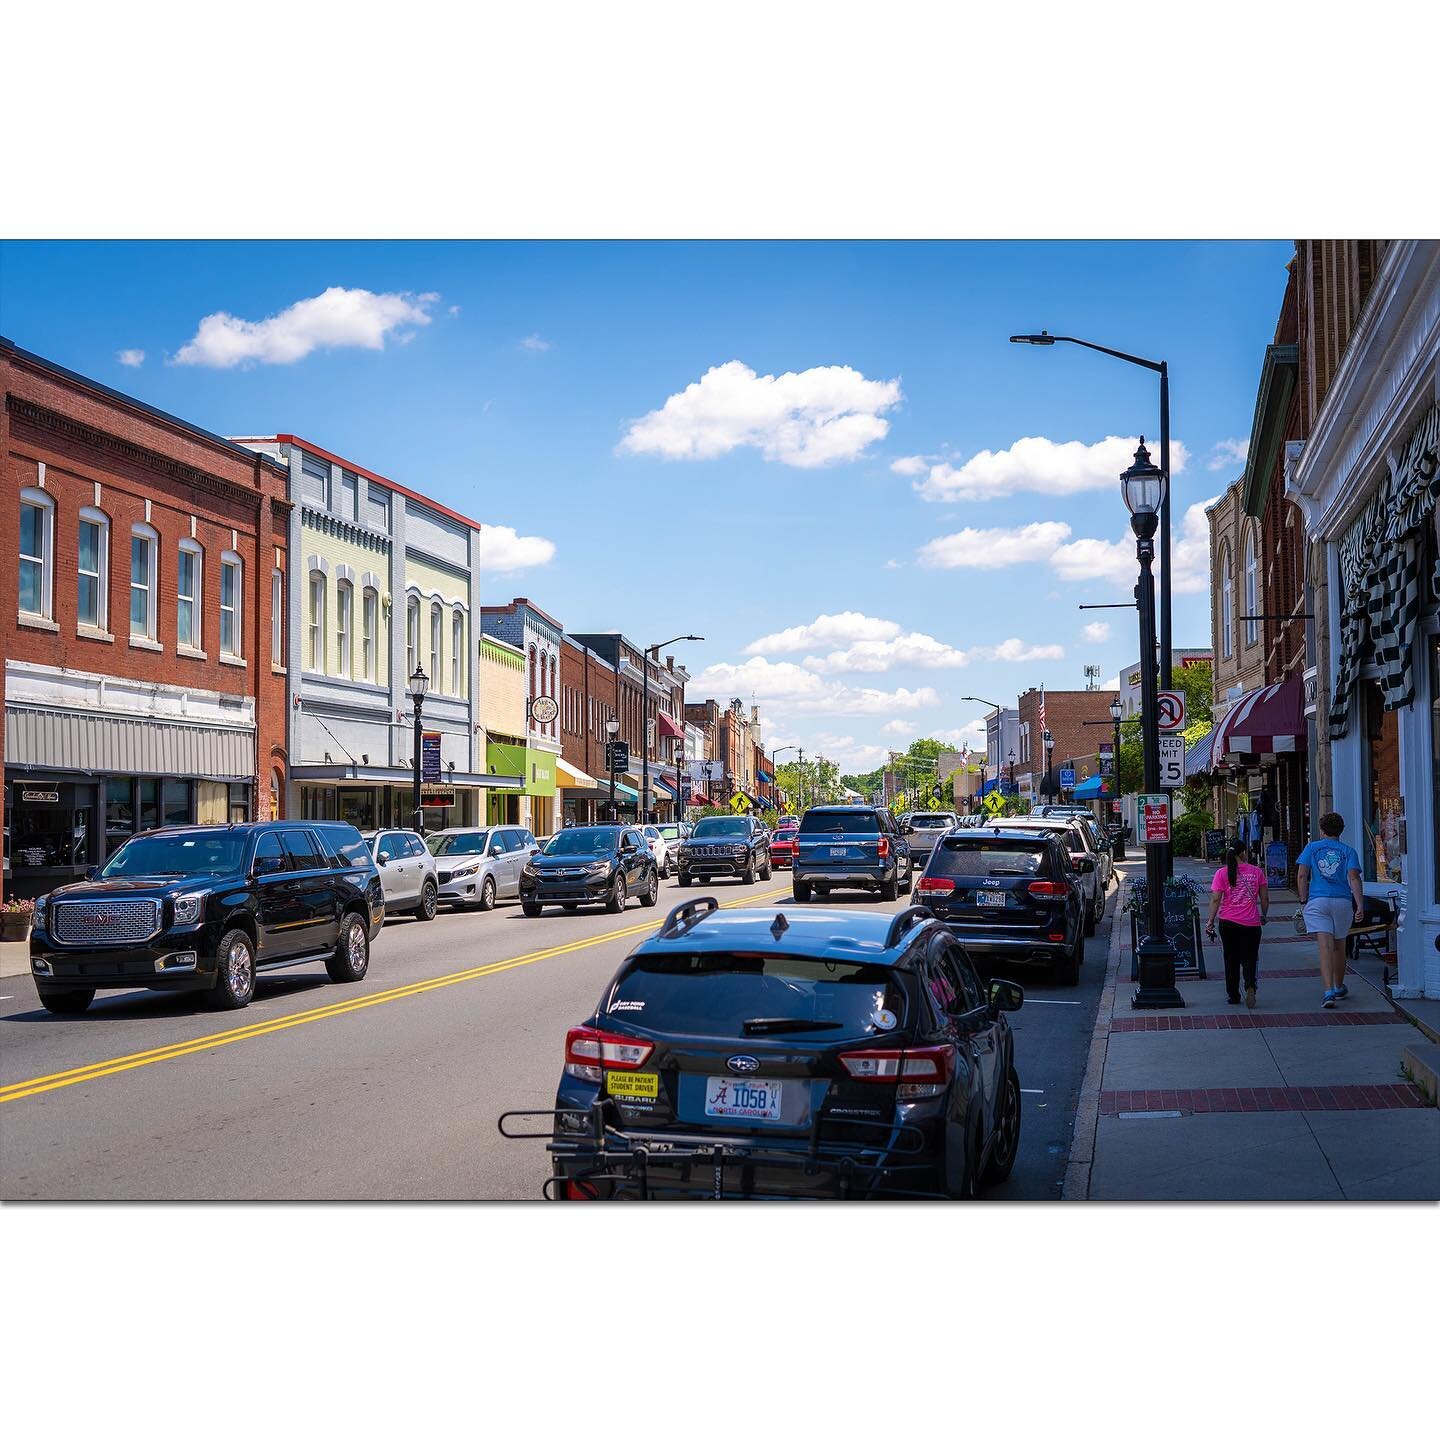 Photography of downtown Mooresville, North Carolina 

#photography #northcarolina #mooresville #smalltown #downtown #mooresvillenc #lakenorman #epicchophouse #ontap